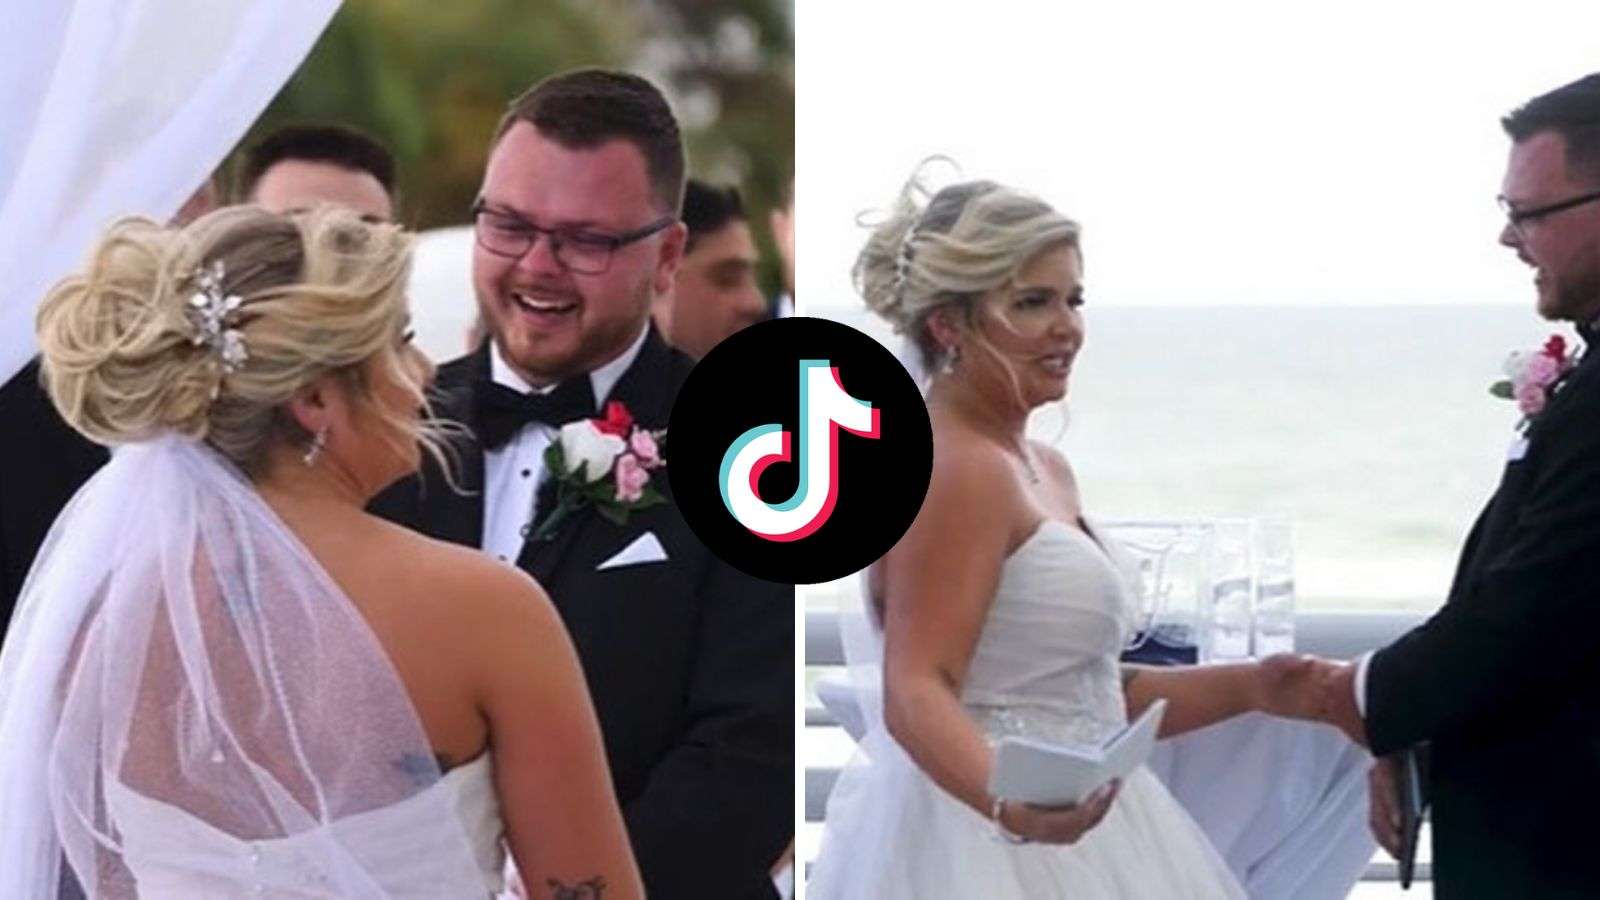 Groom in hysterics as bride gets pooped on by bird while delivering vows